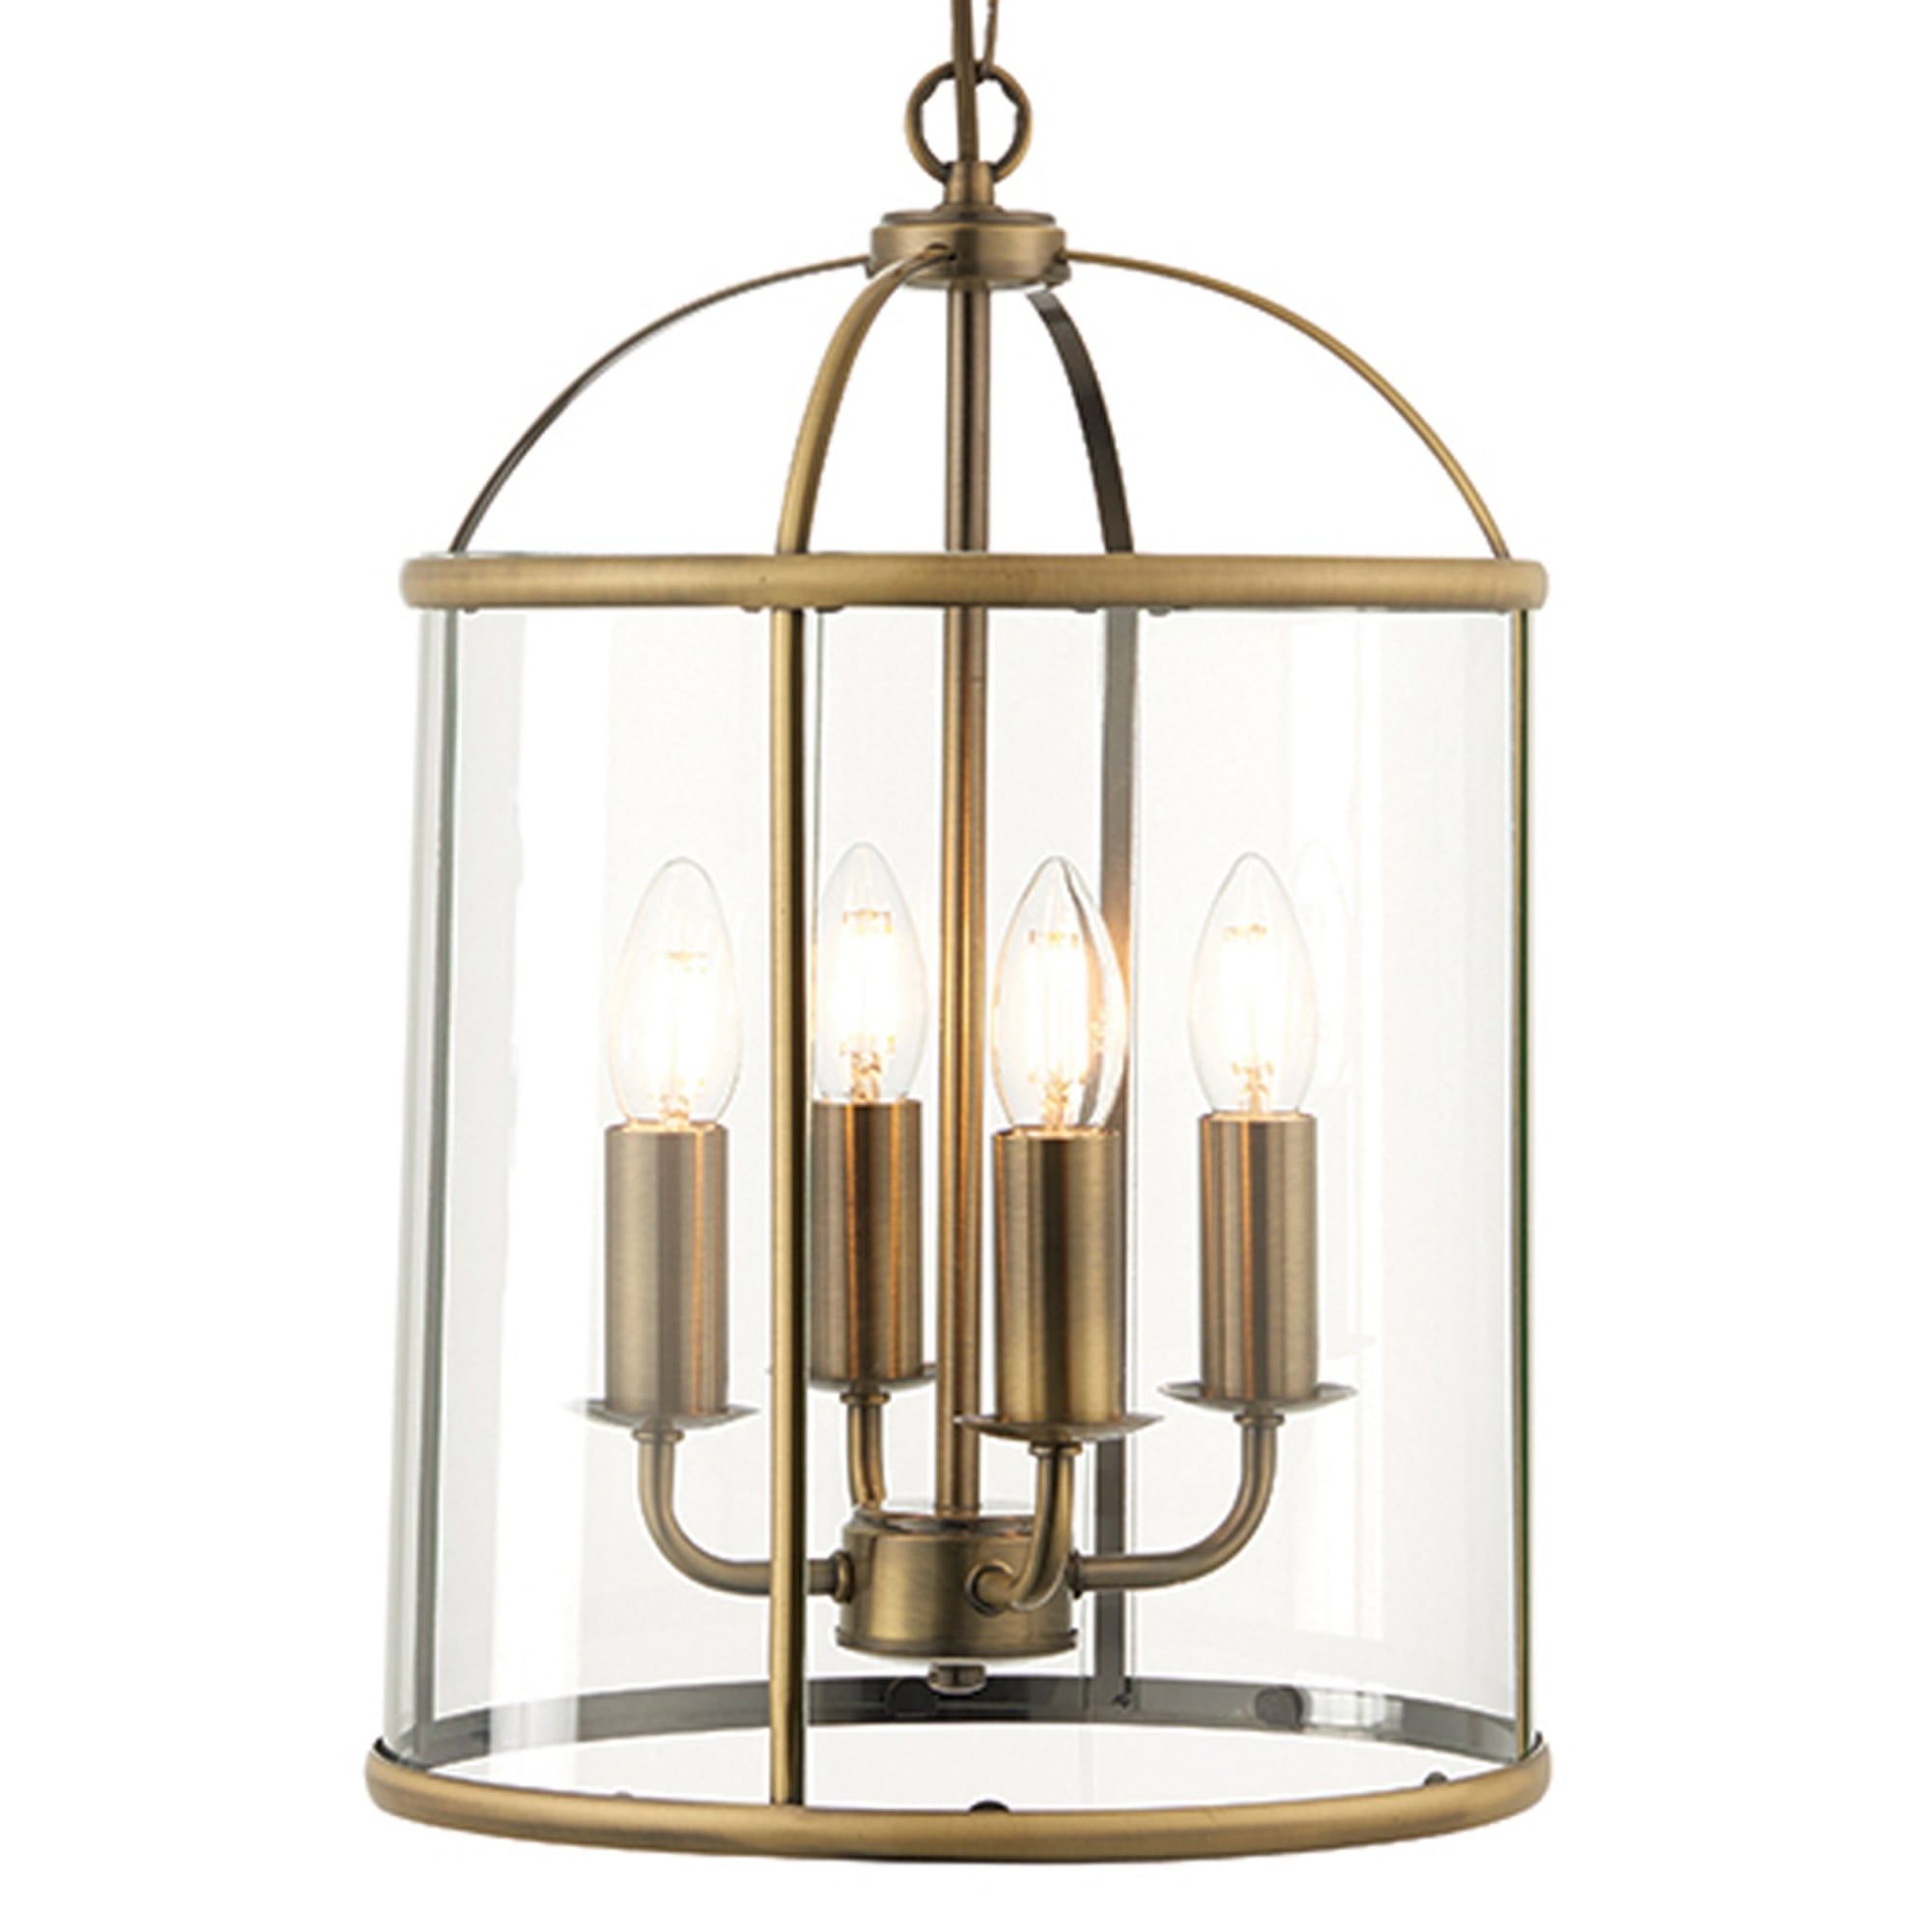 Endon 69455 Lambeth 4 Light Antique Brass And Glass Lantern Pendant For Aged Brass Lantern Chandeliers (View 9 of 15)